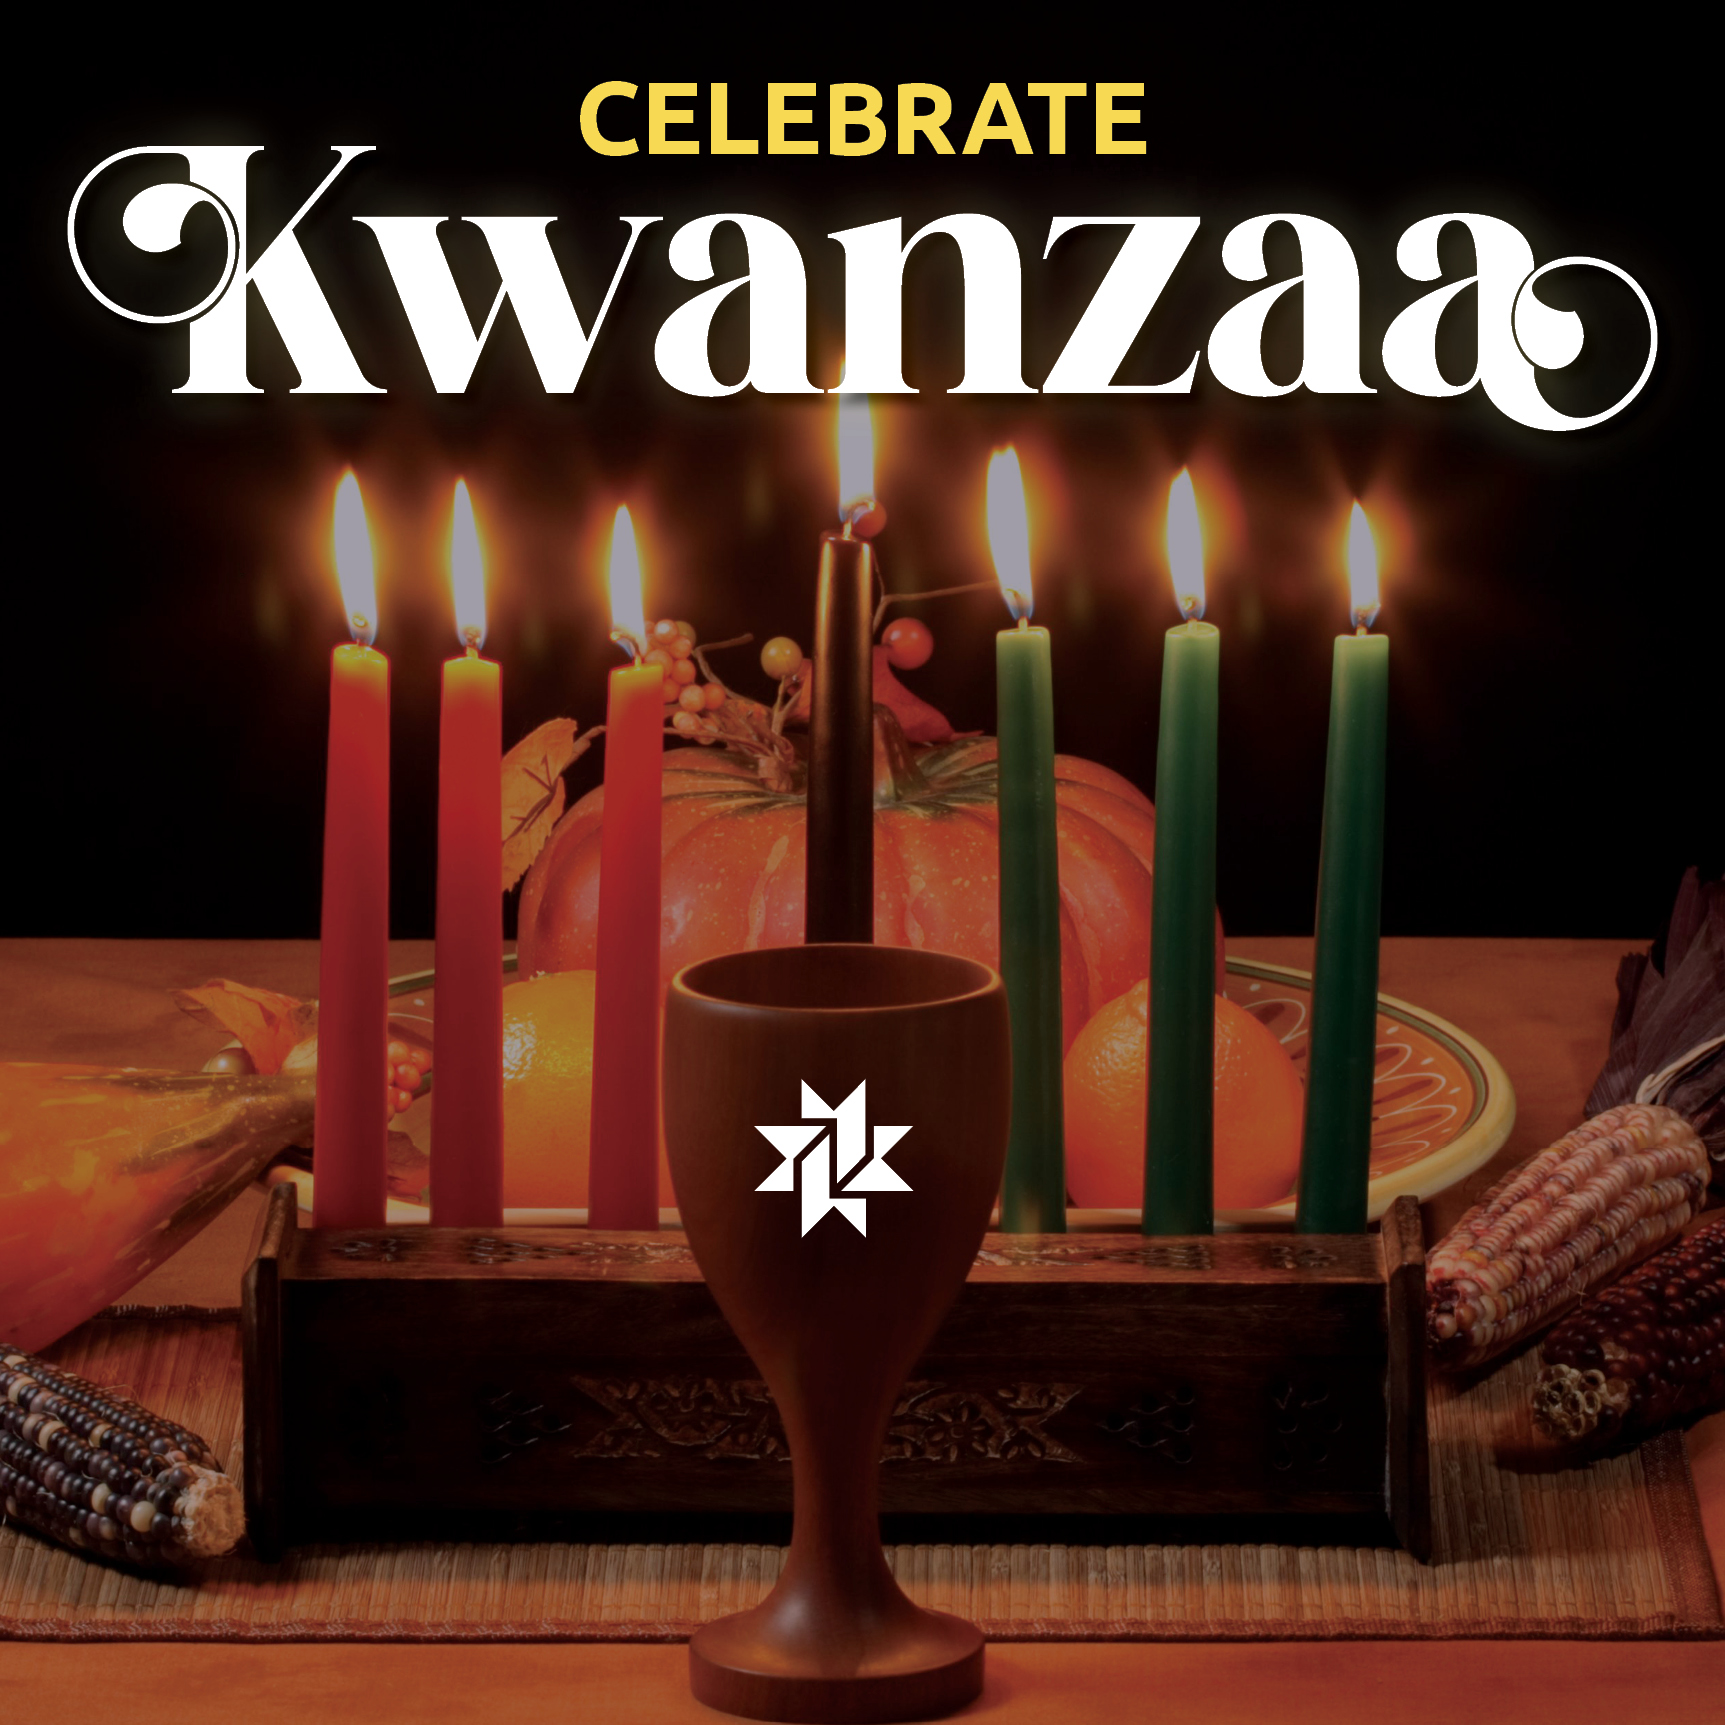 Ujima (Collective Work and Responsibility)! Celebrate Kwanzaa with Special Guests Friends of Joda and Pam Jiner, Girltrek Denver